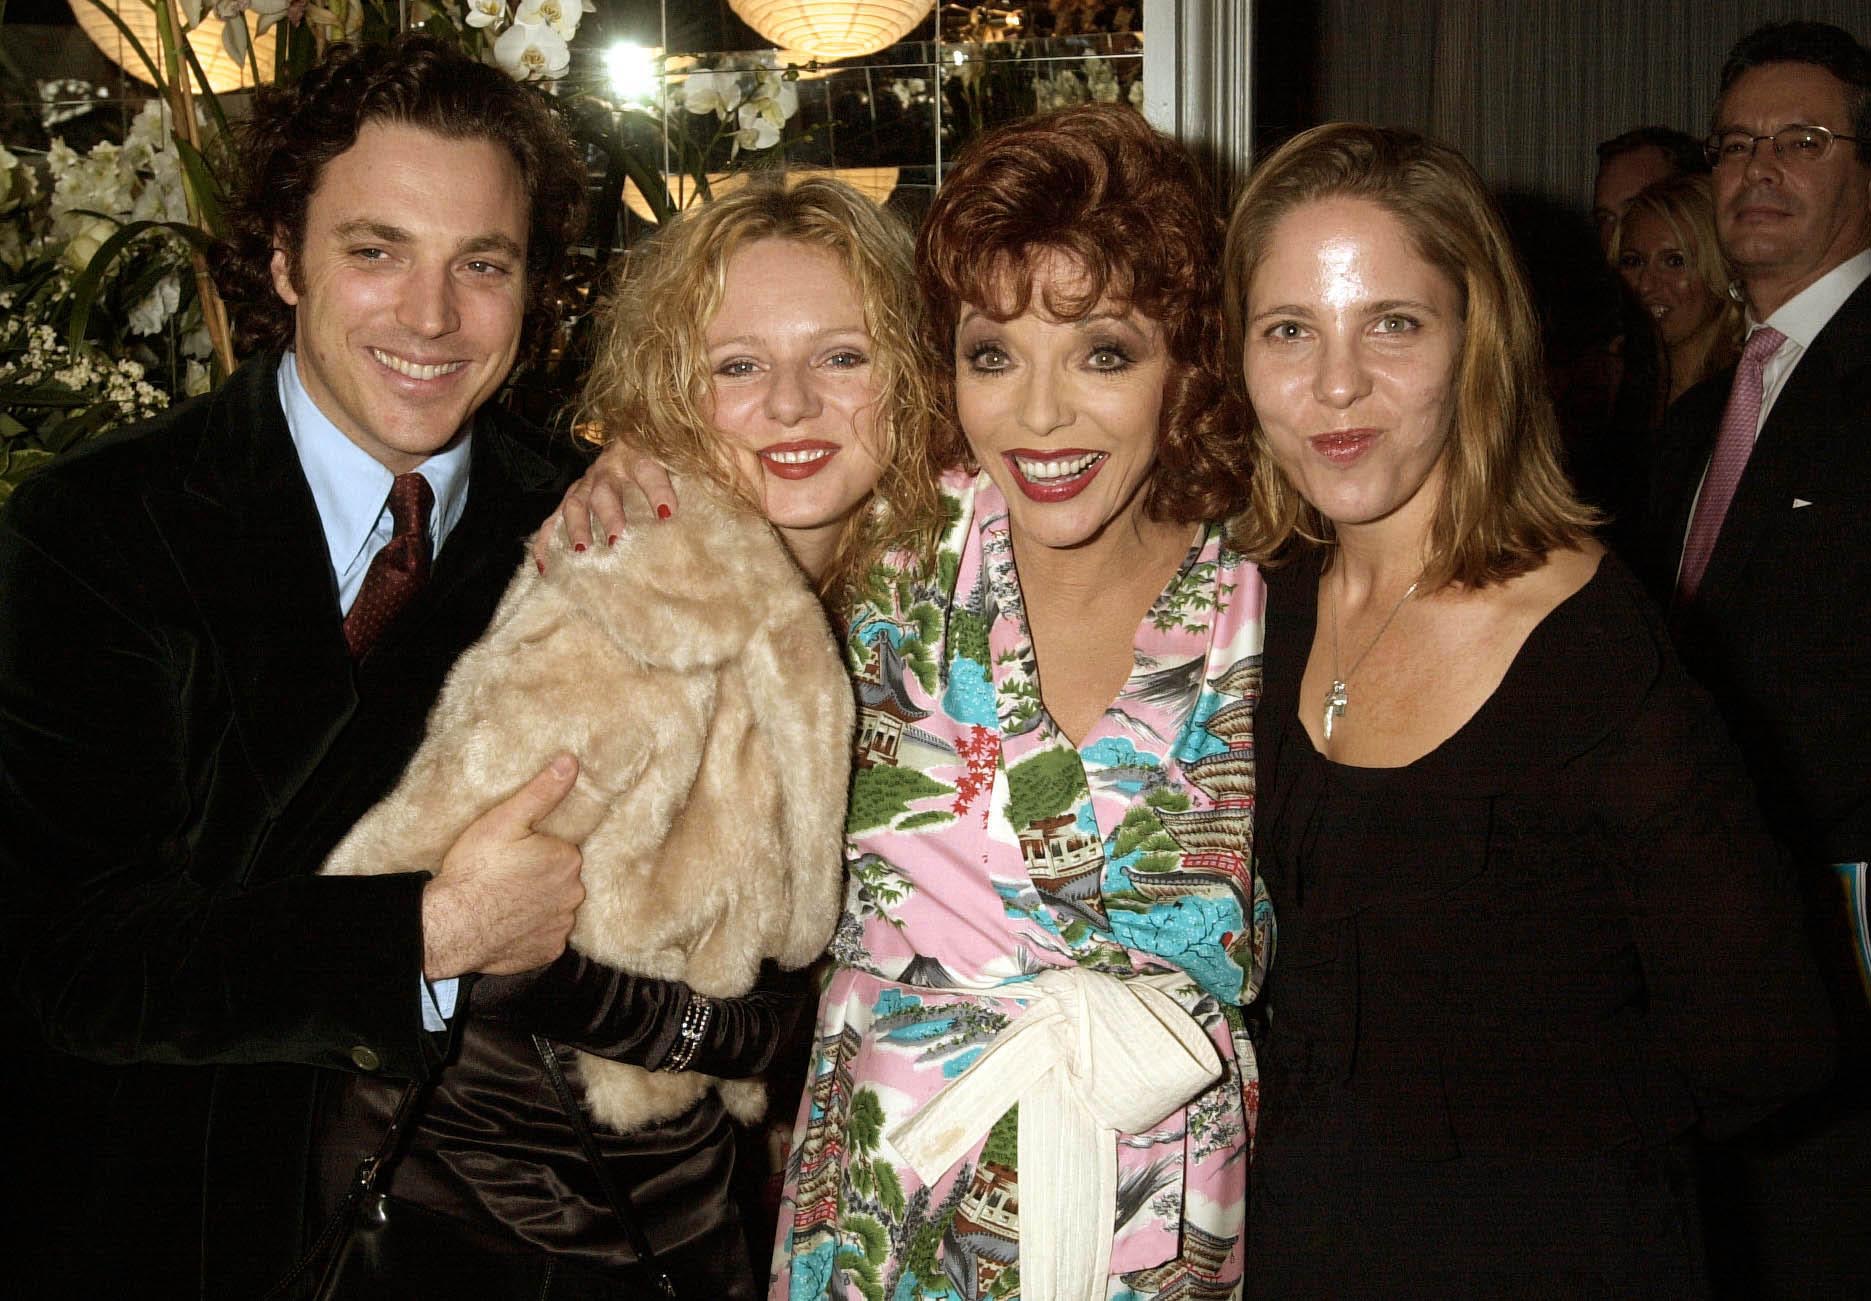 Joan Collins with her children Alexander (Sacha) Newley, Tara Newley and Katyana Kass, attending the first night of "Over The Moon" at The Waldorf Hotel, London on October, 16, 2001. | Source: Getty Images